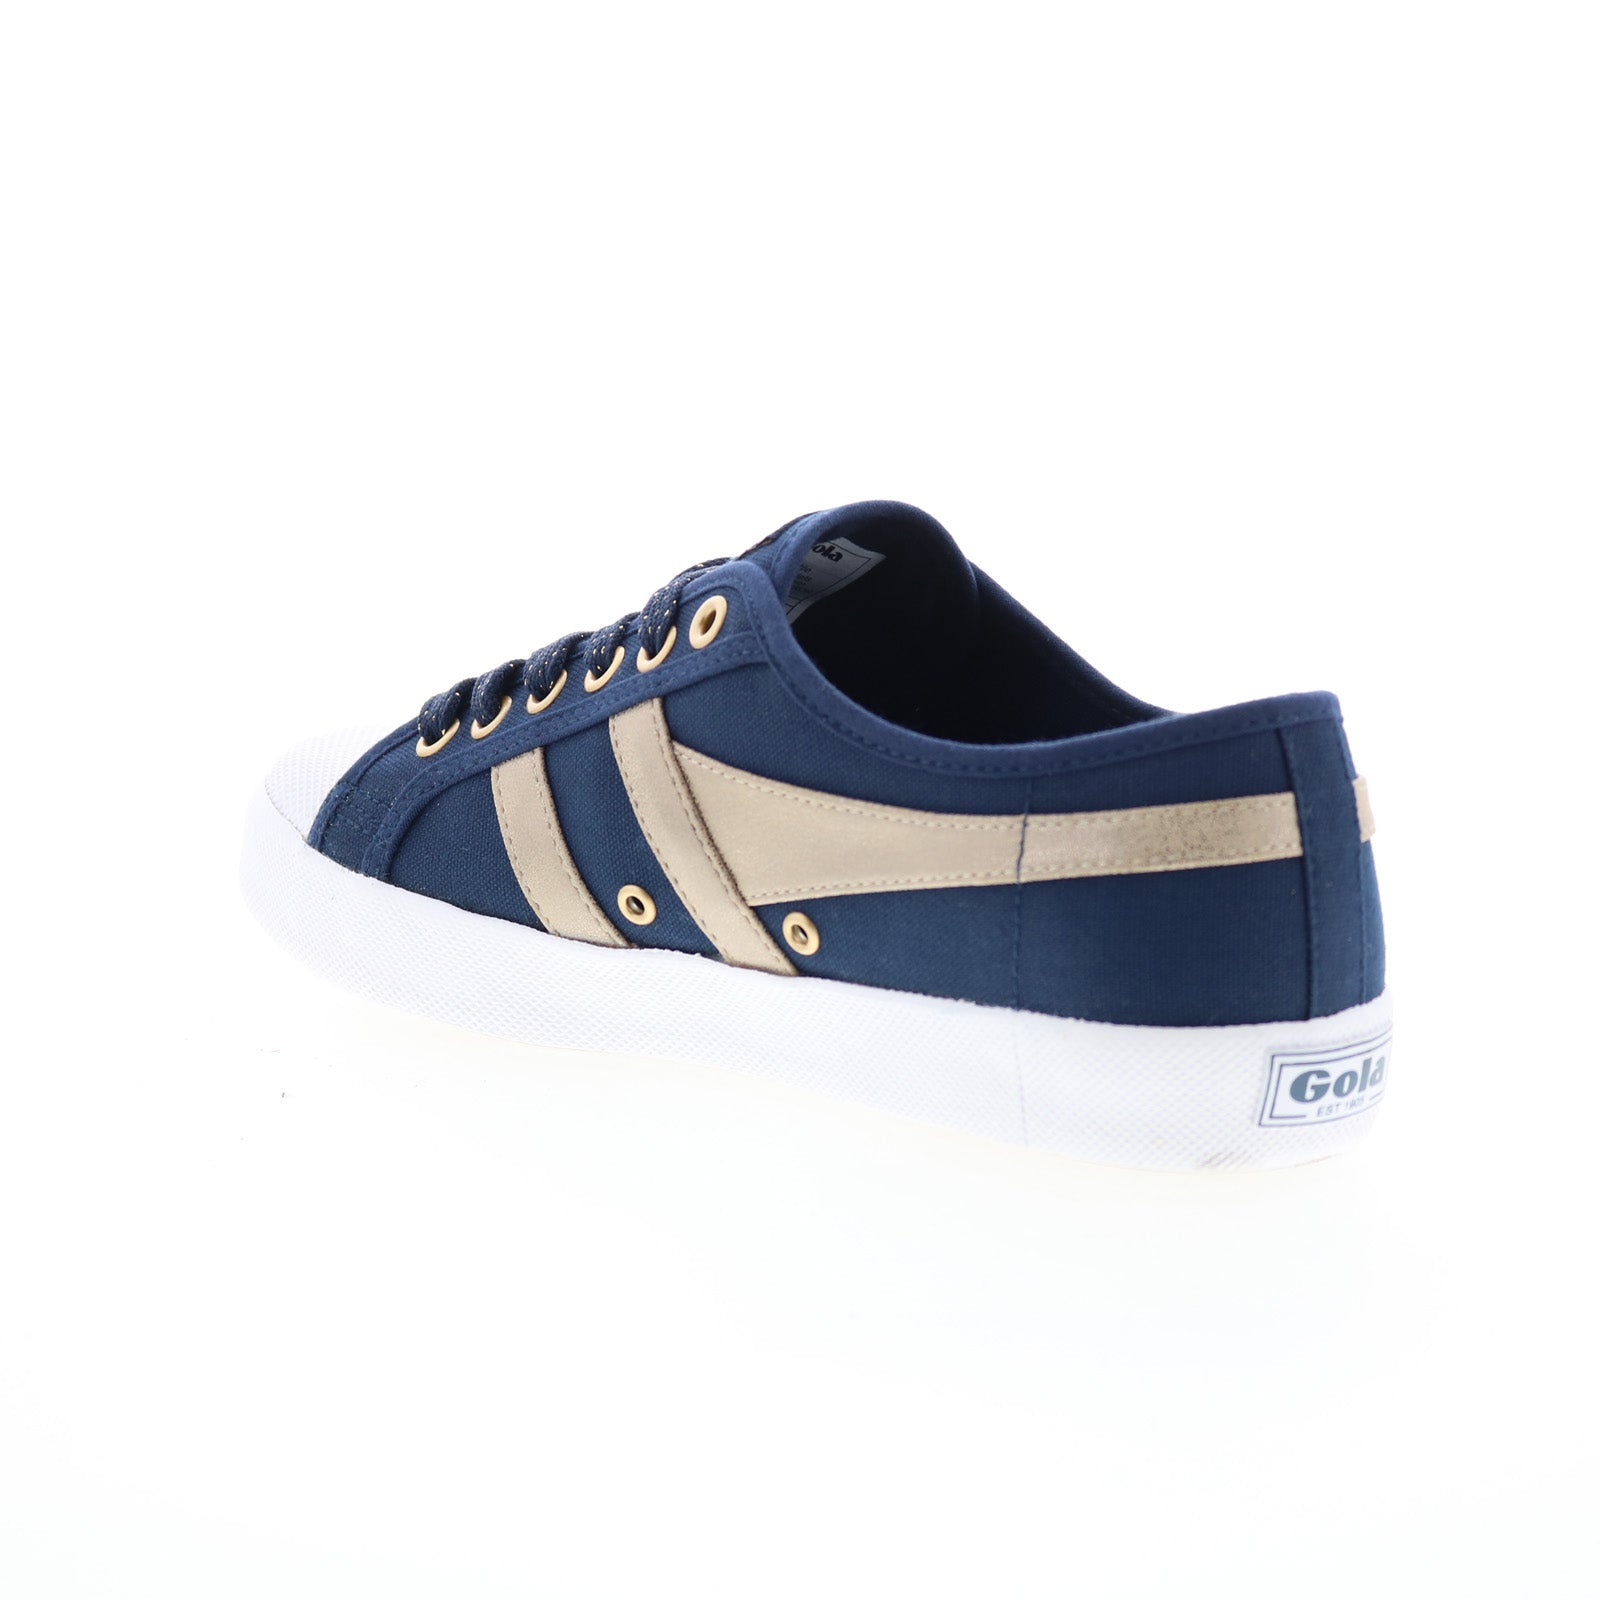 Gola Coaster CLA561 Womens Blue Canvas Lace Up Lifestyle Sneakers Shoes